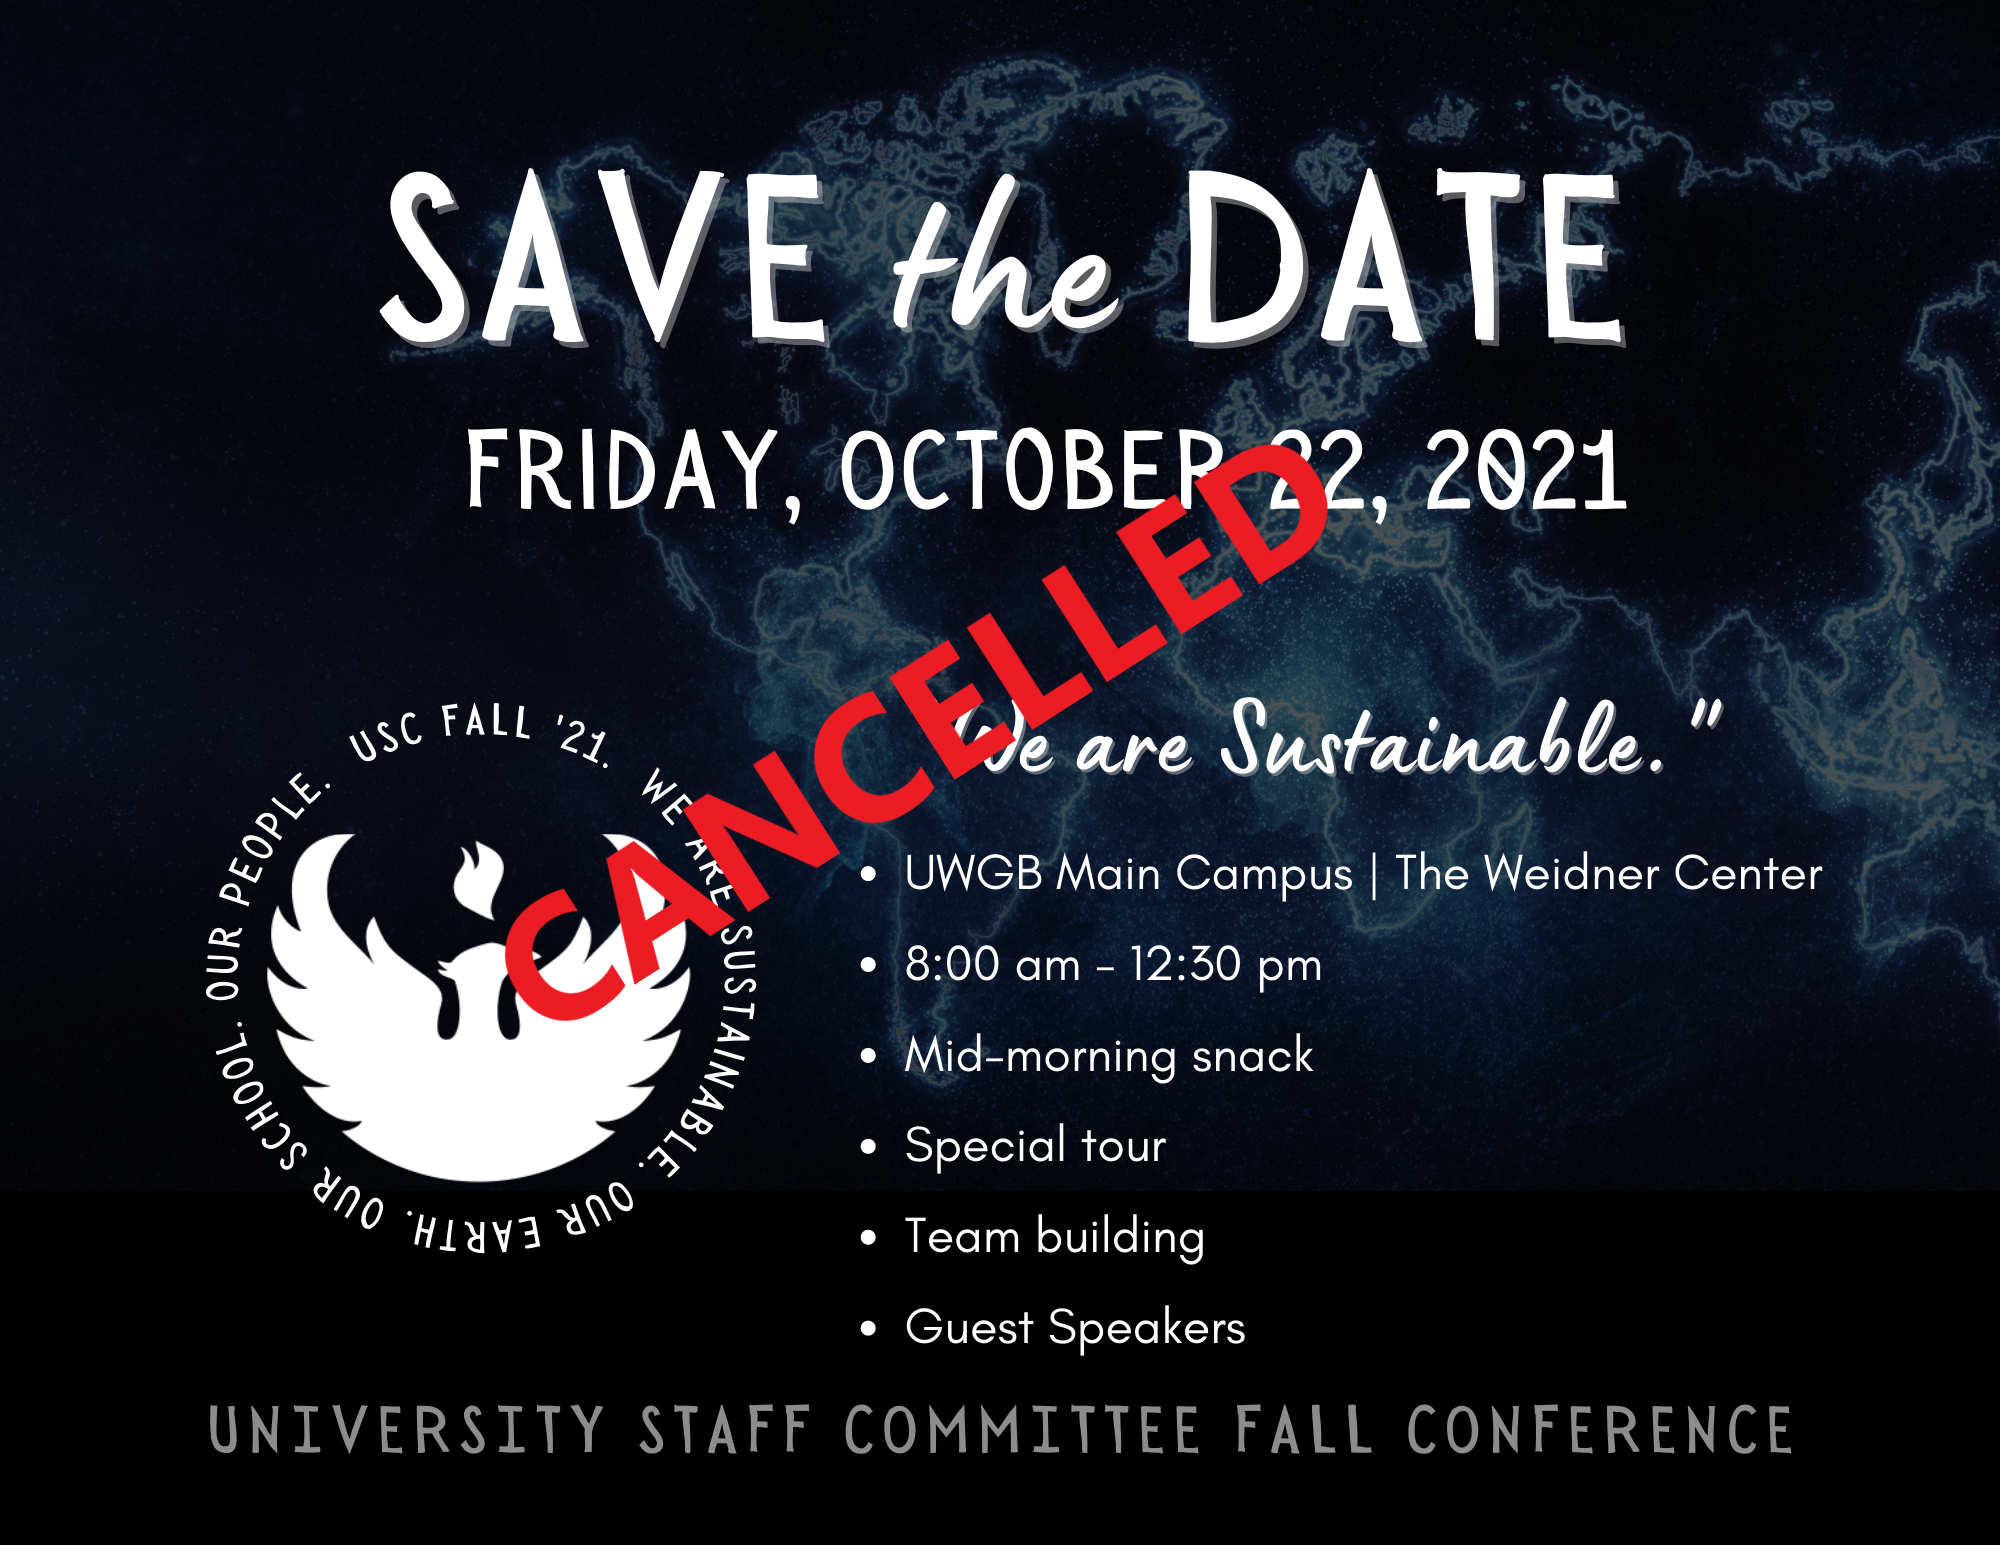 Save the Date | Friday Oct.22 2021 | UWGB Main Campus | 8:00 am - 12:30 pm